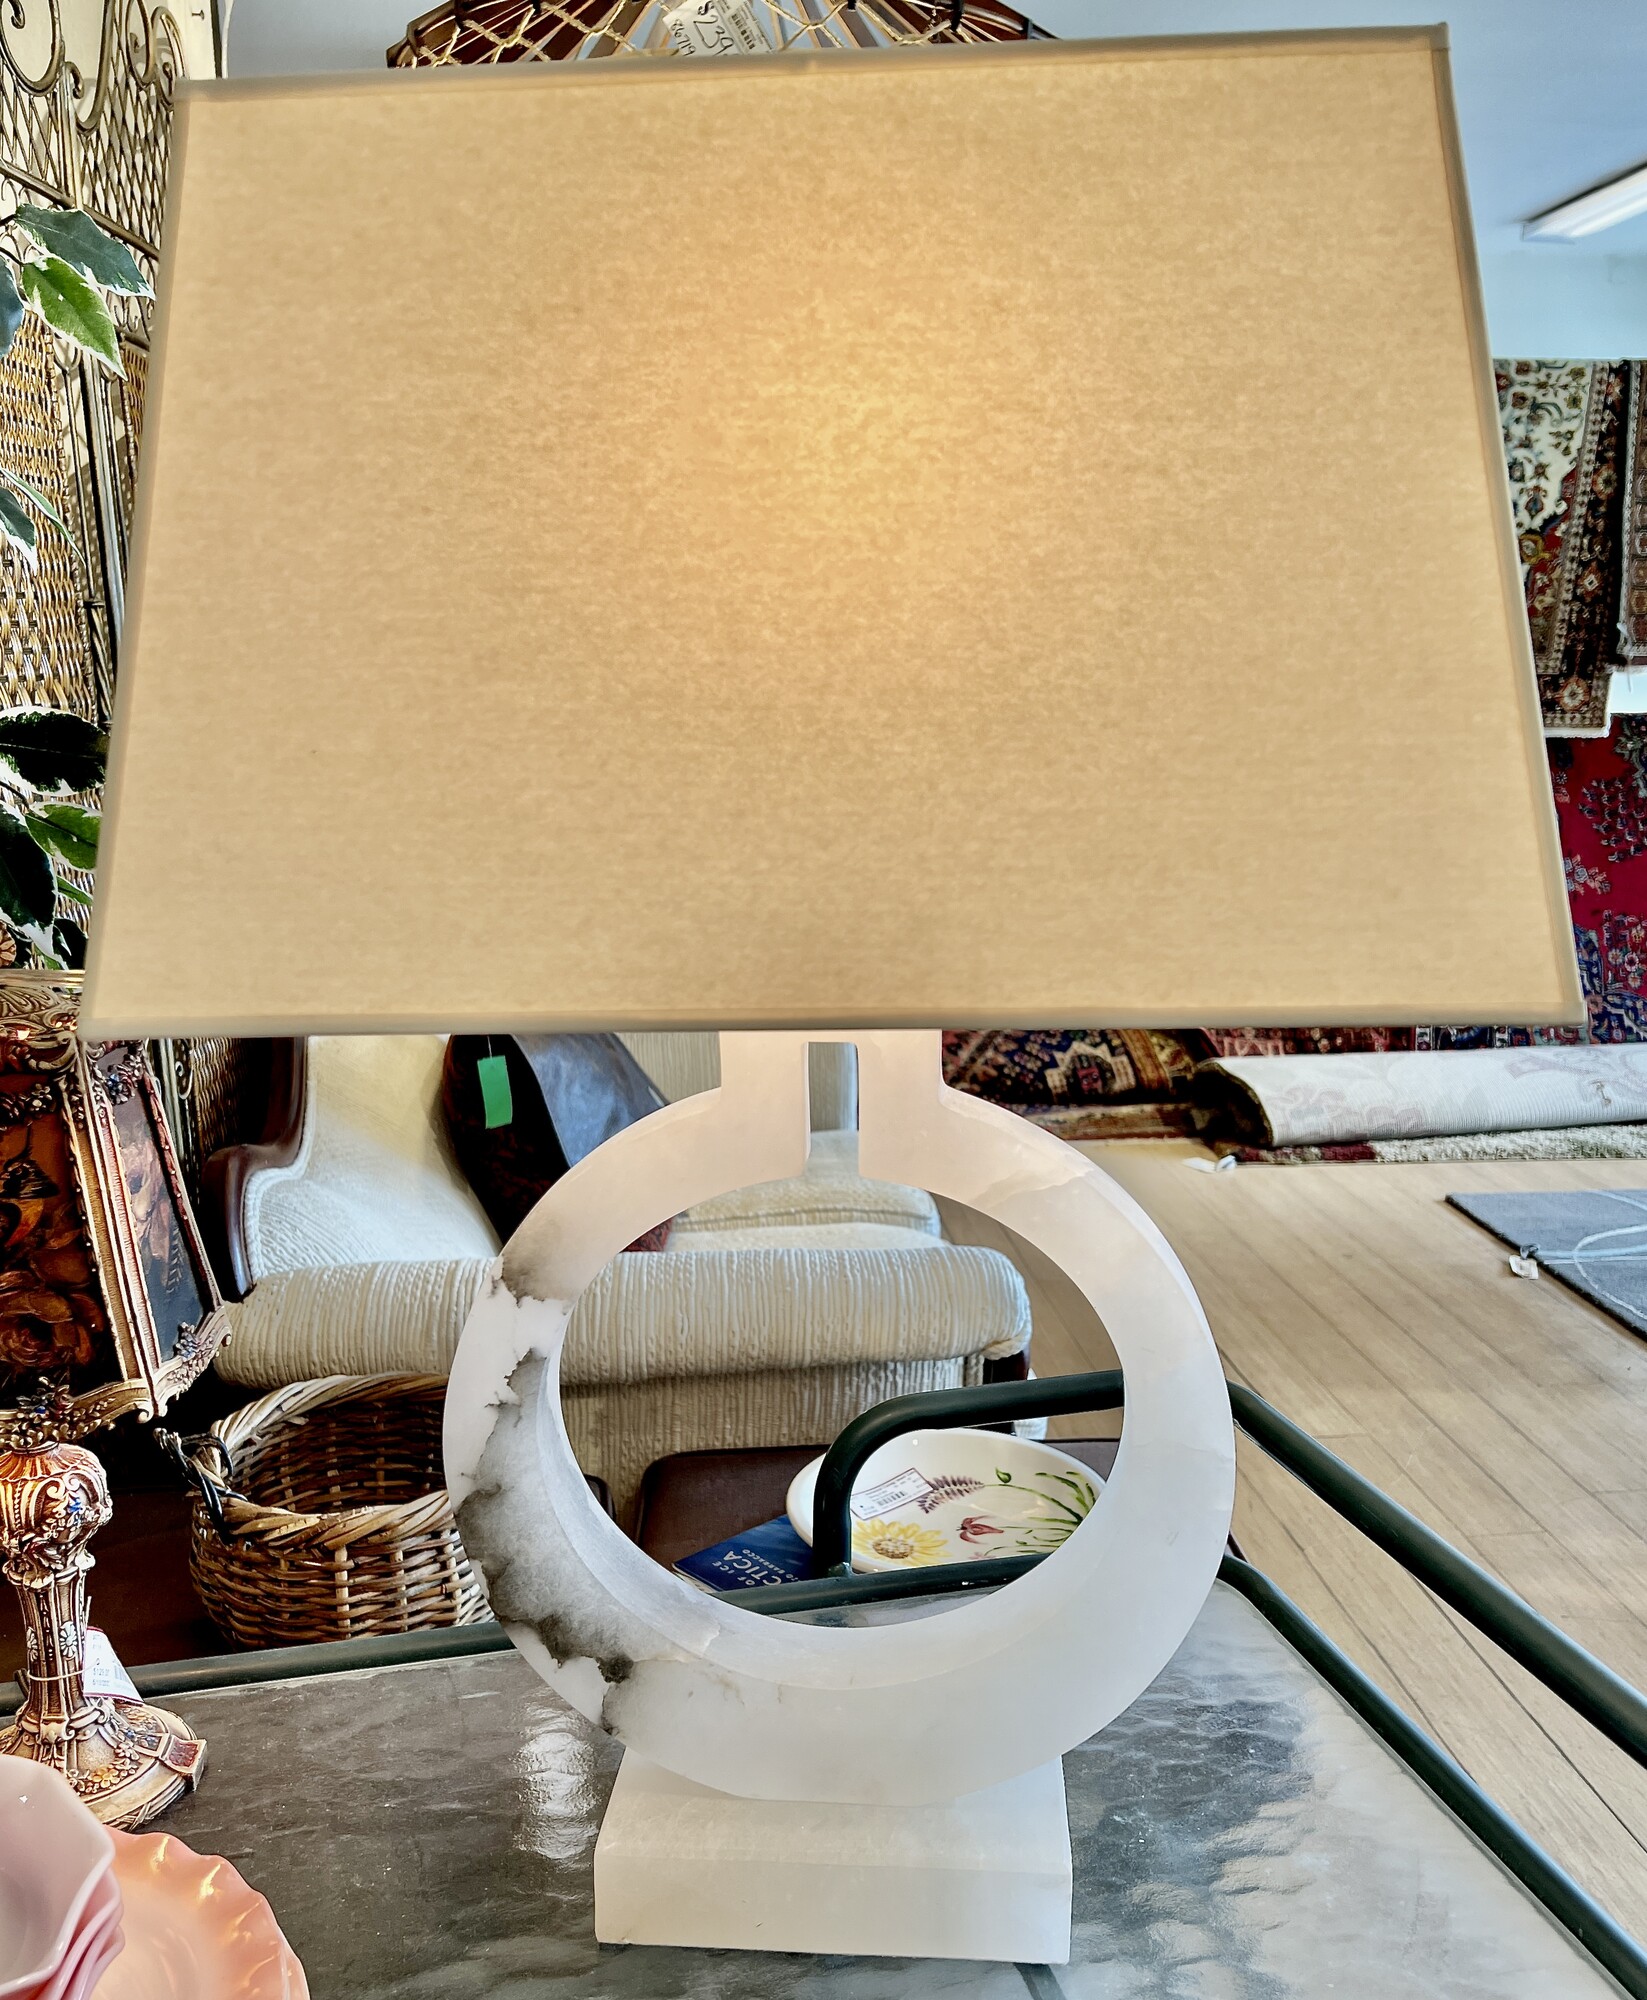 Alabaster Ring Form Table Lamp
Size: 27\" H